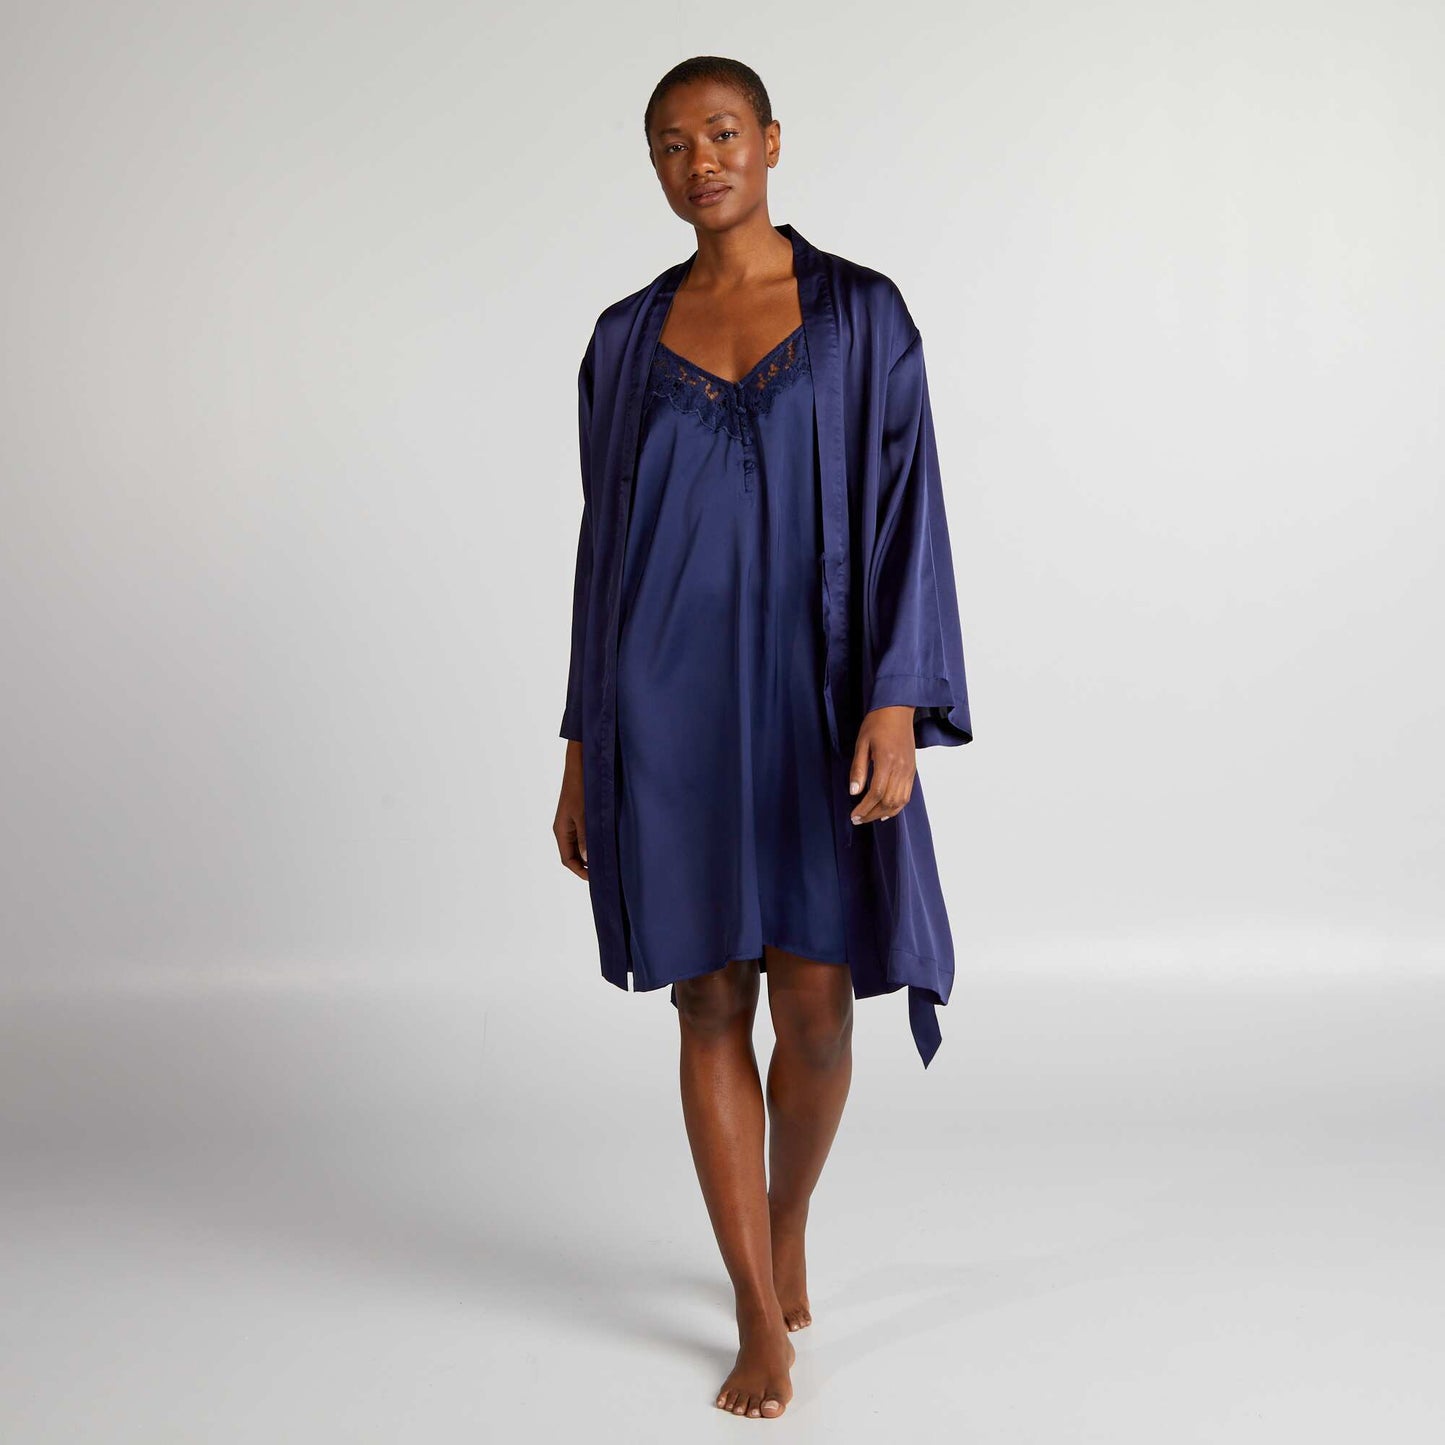 Long satin dressing gown BLUE